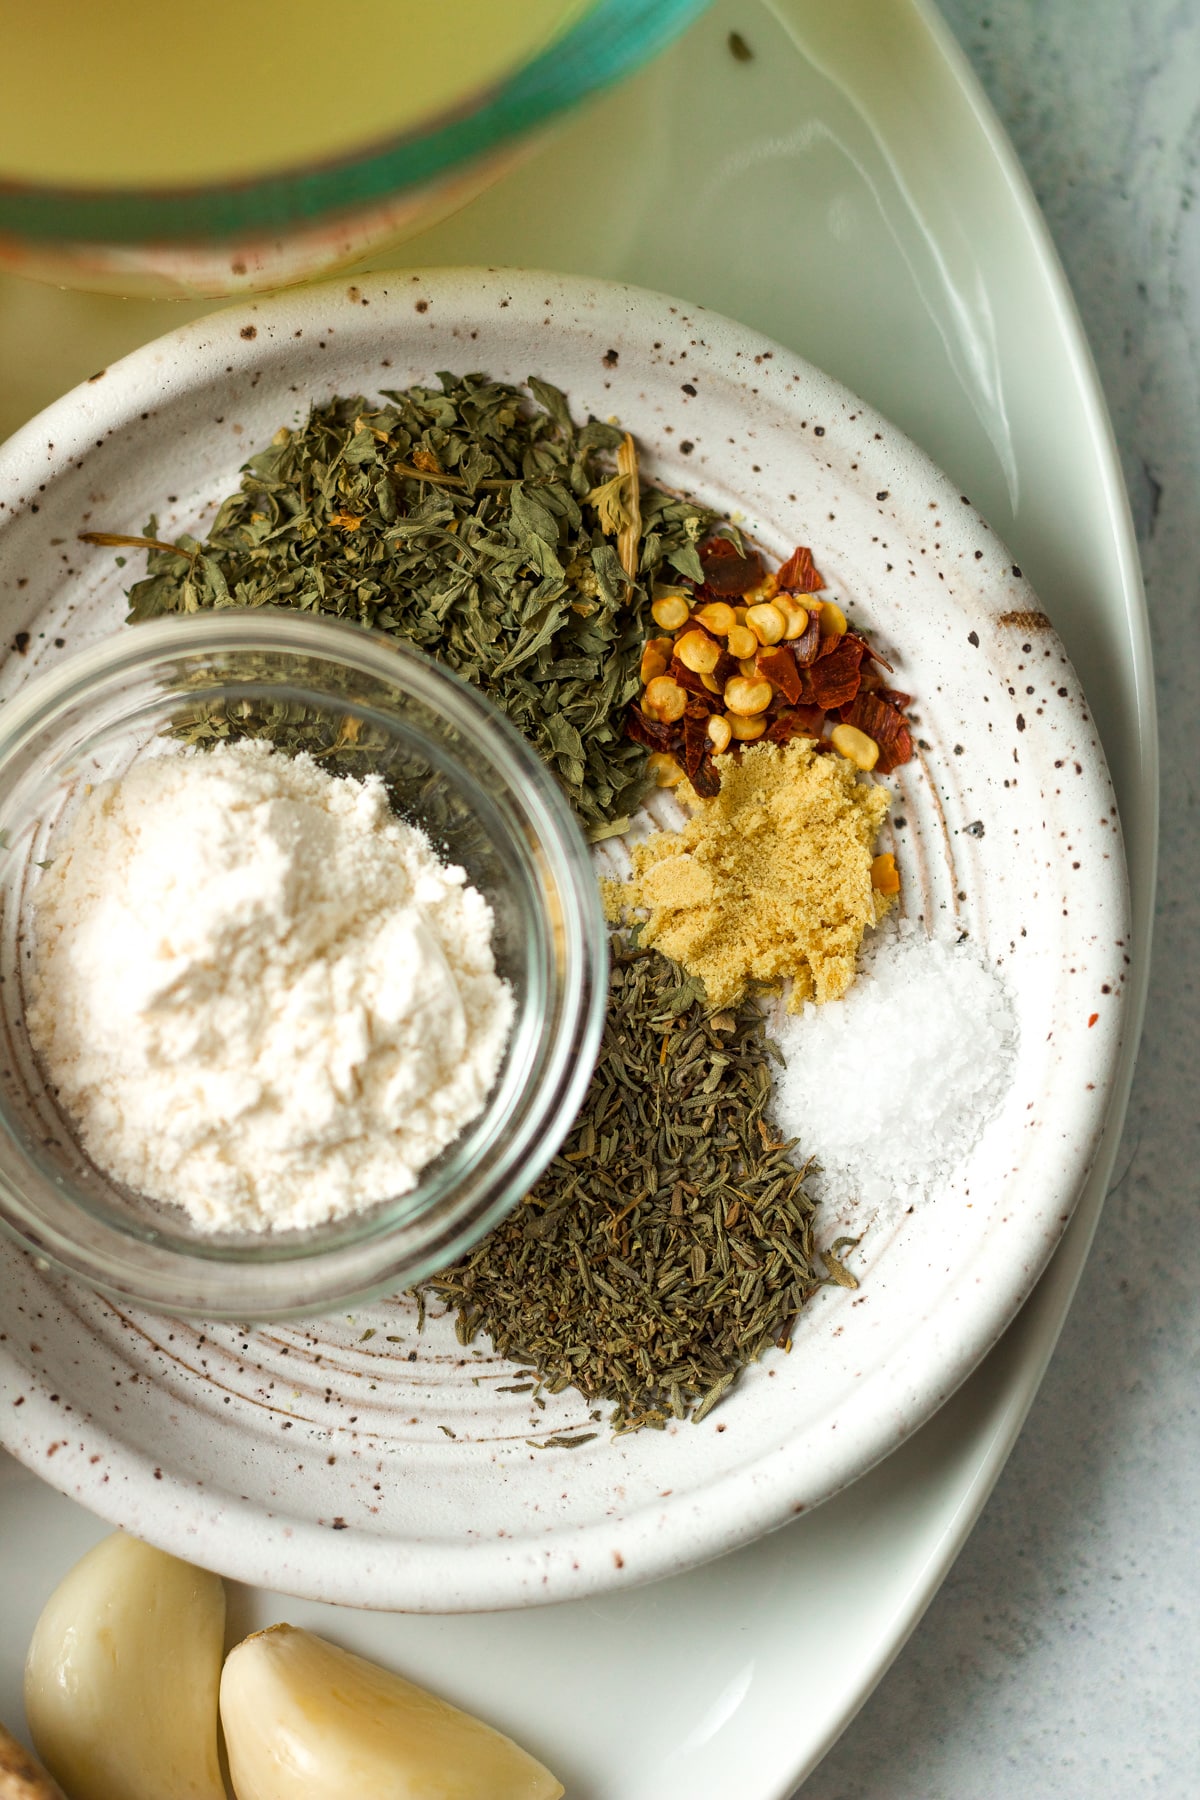 Spices and flour on small plate.